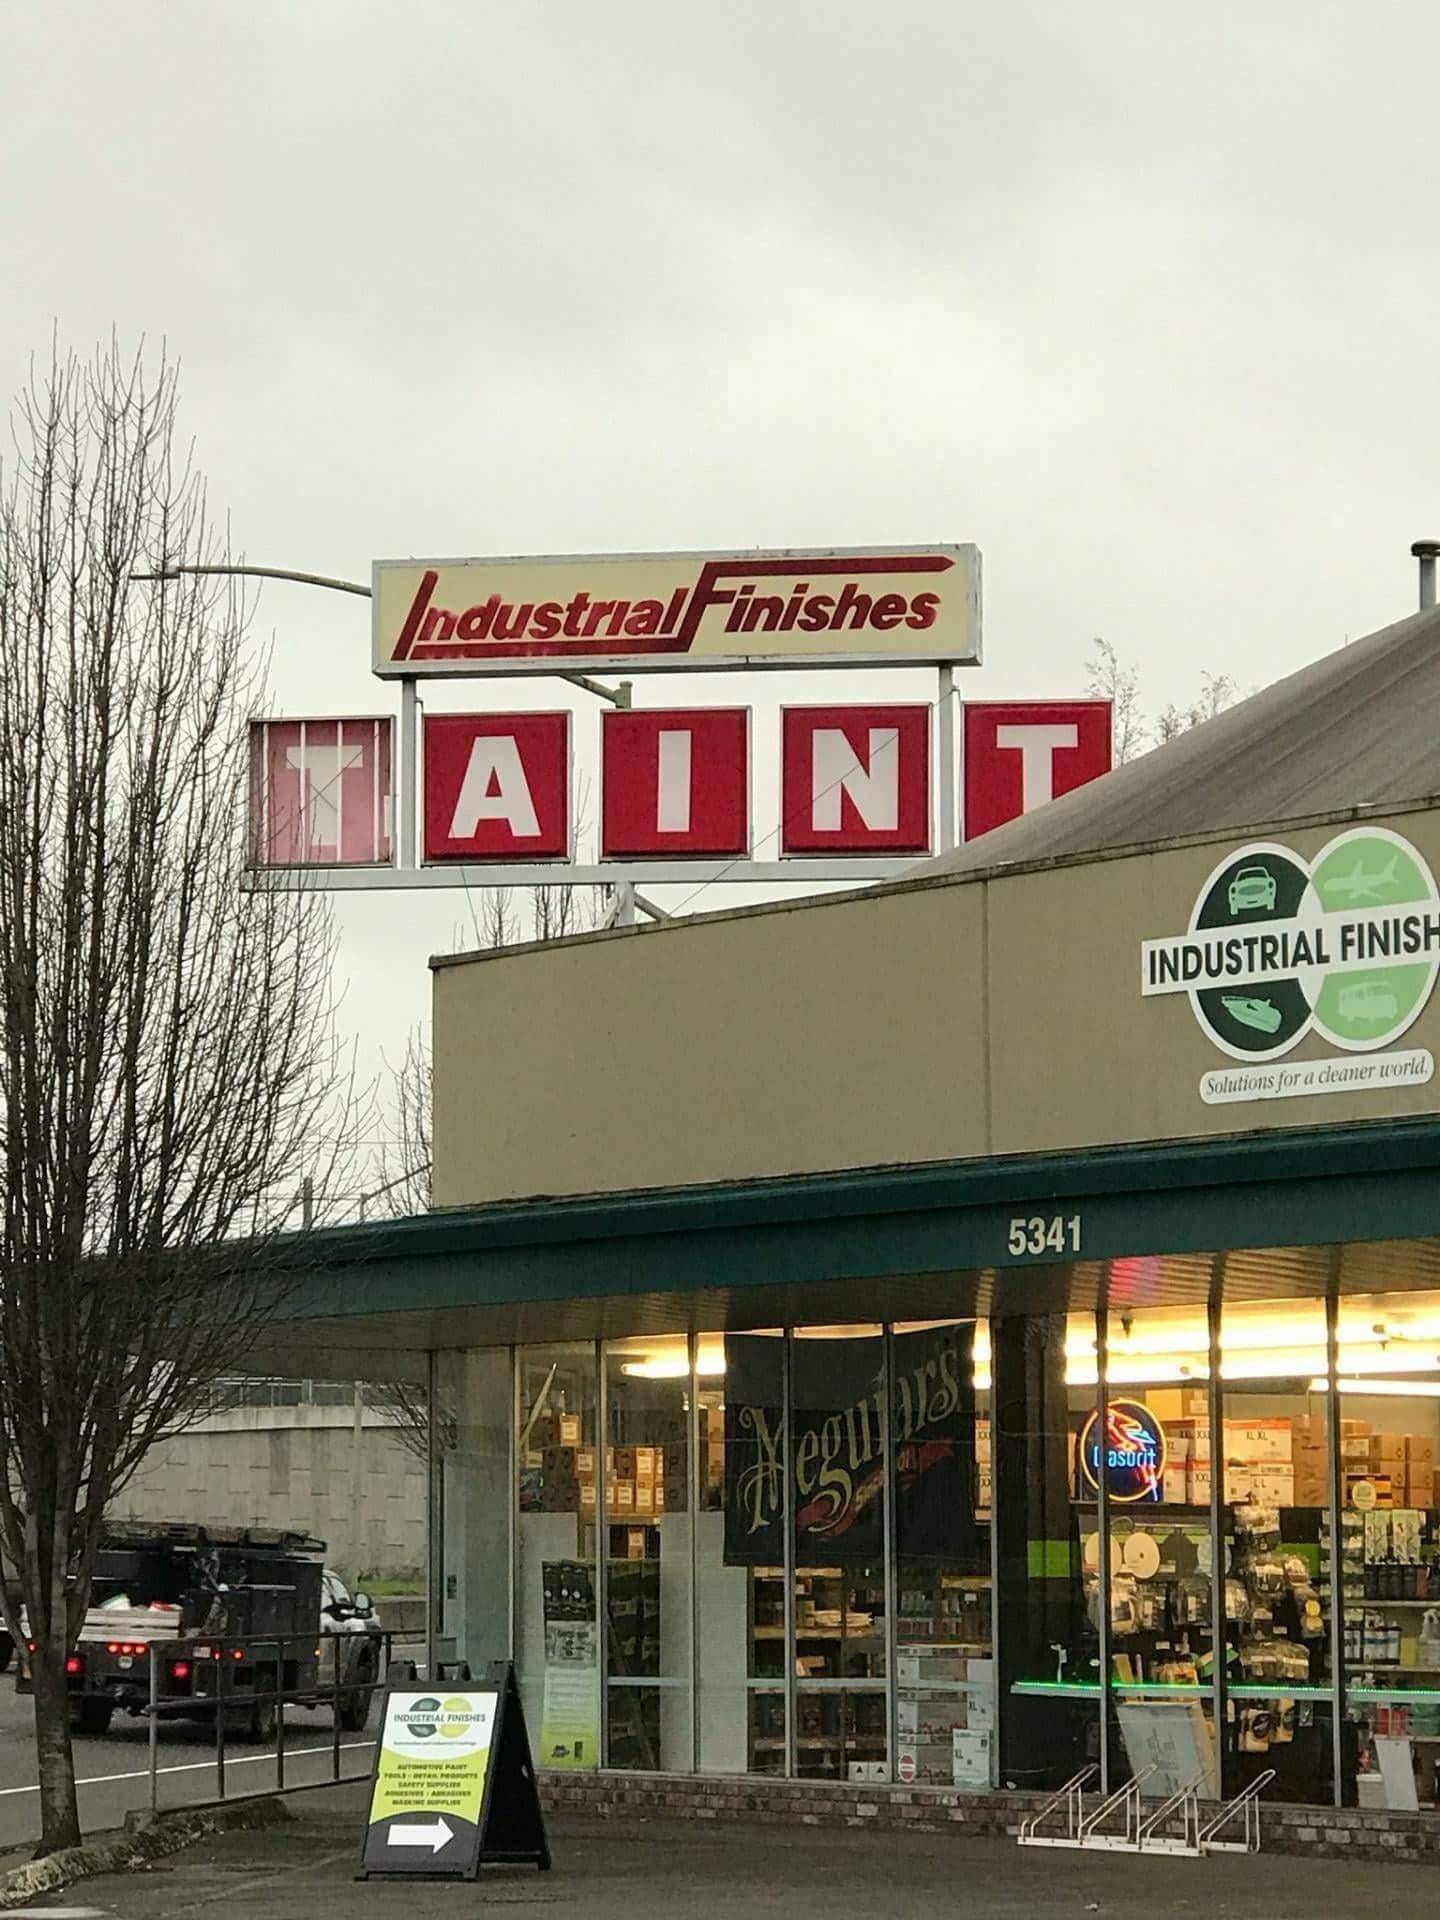 This paint shops sign broke just right